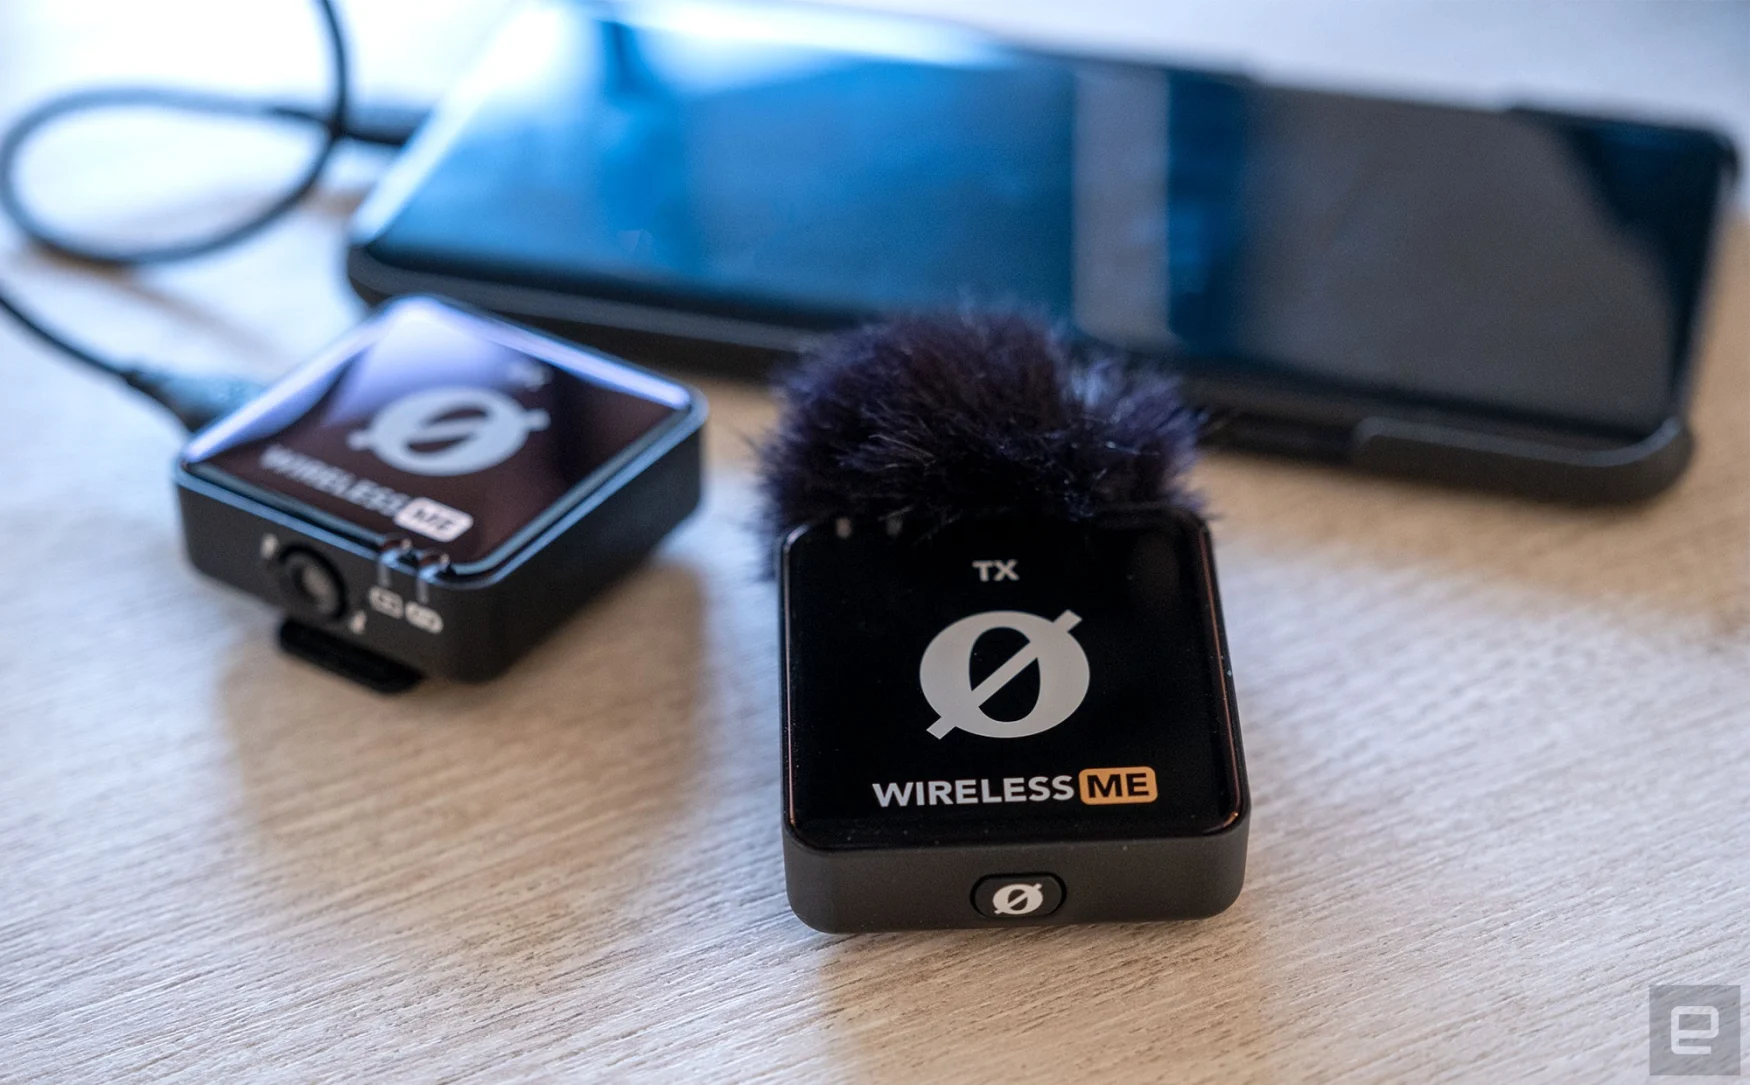 Rode's Wireless ME lav mic system connected to a phone.